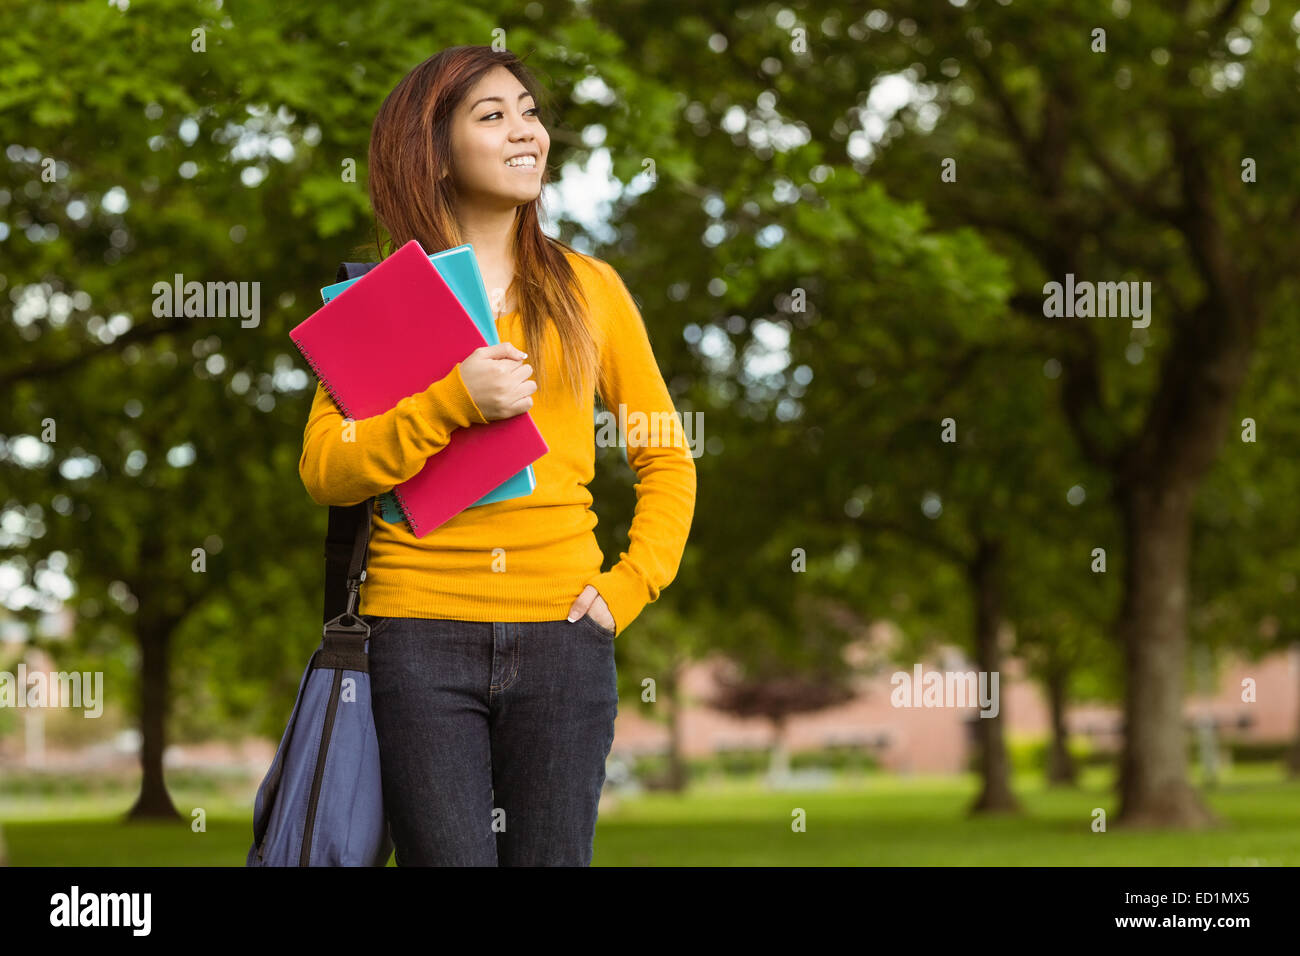 Female college student with books in park Stock Photo